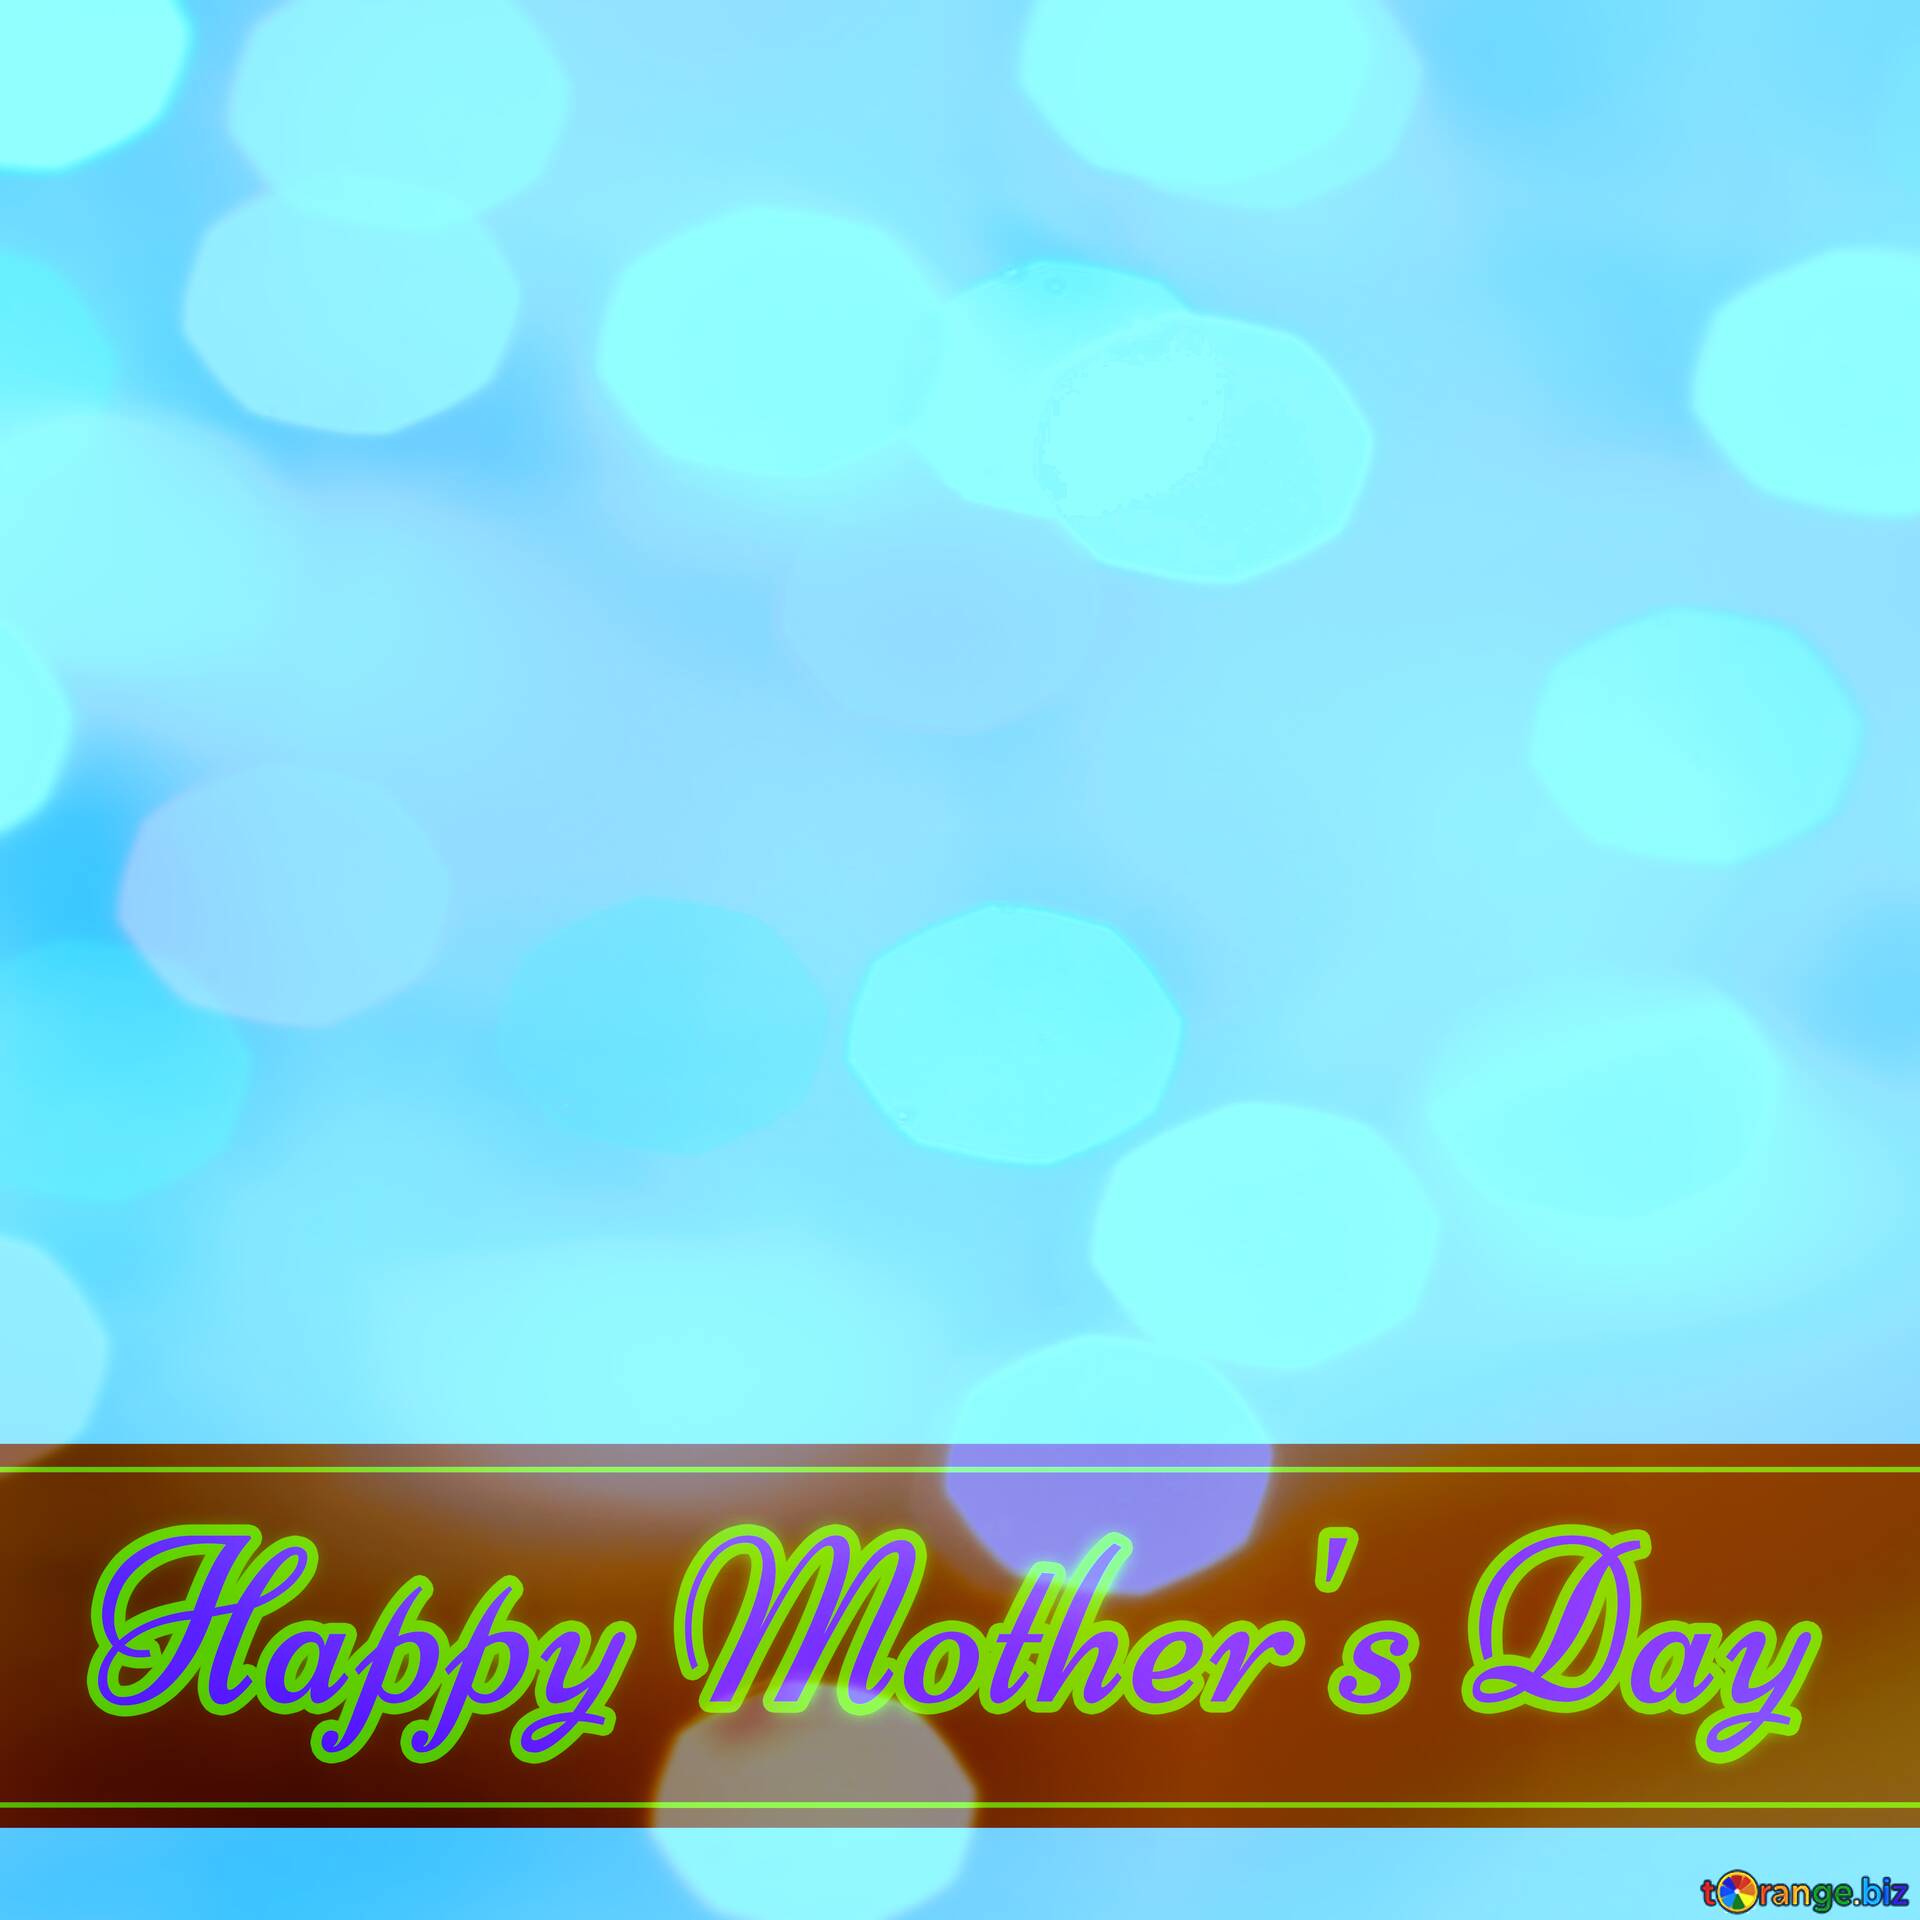 Download free picture Happy Mother's Day card with blue sky Bokeh background  on CC-BY License ~ Free Image Stock  ~ fx №171096